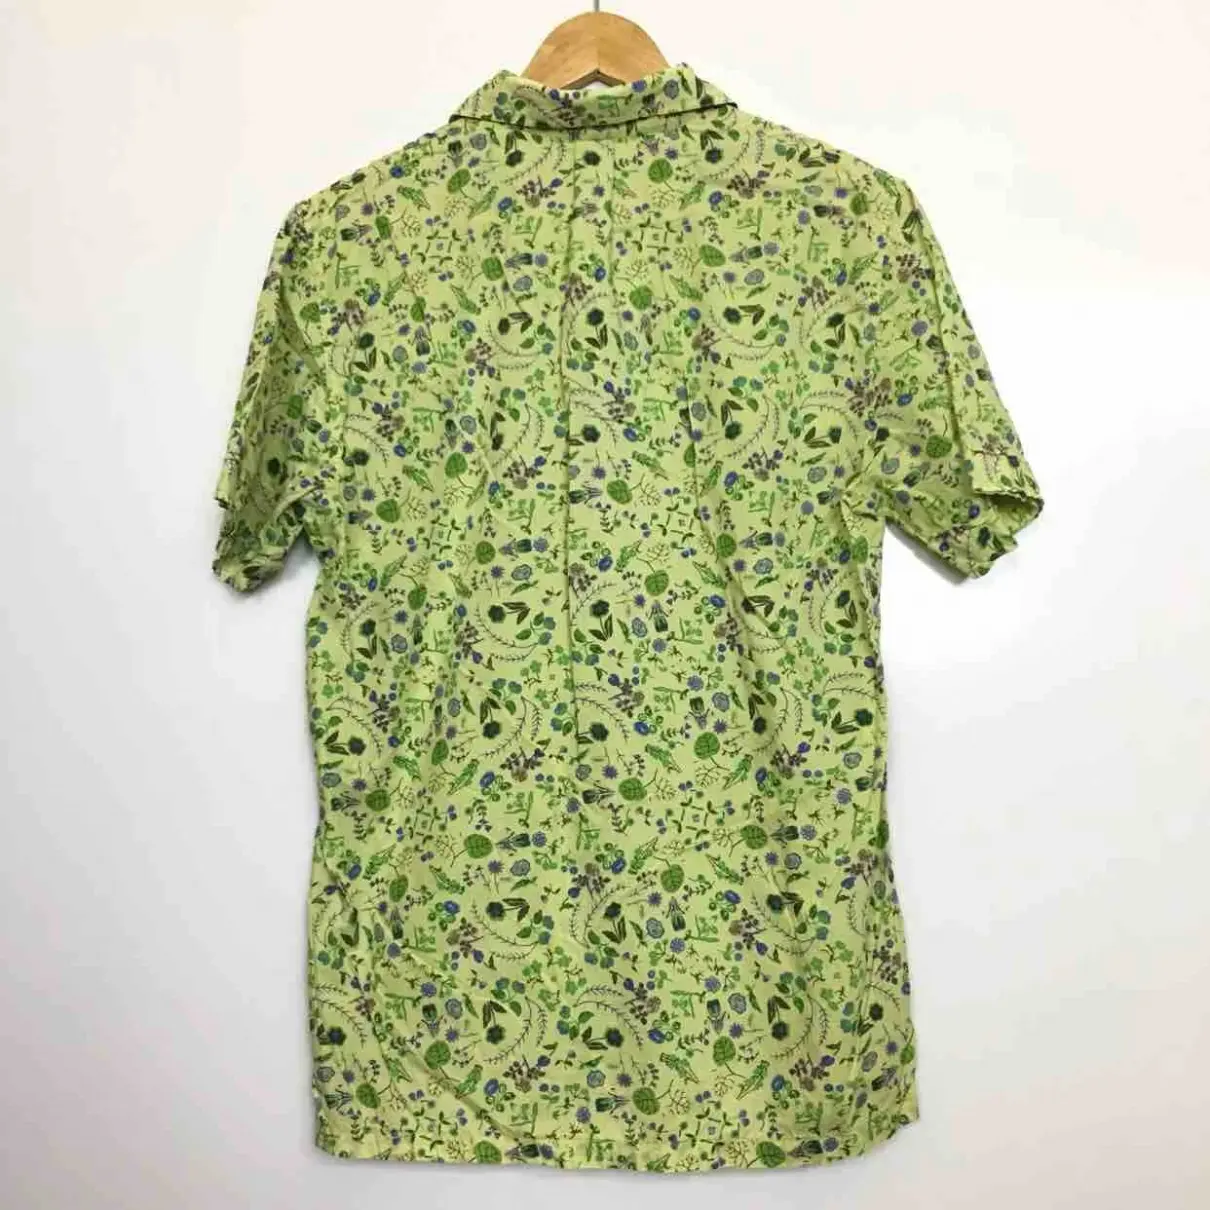 Cp Company Shirt for sale